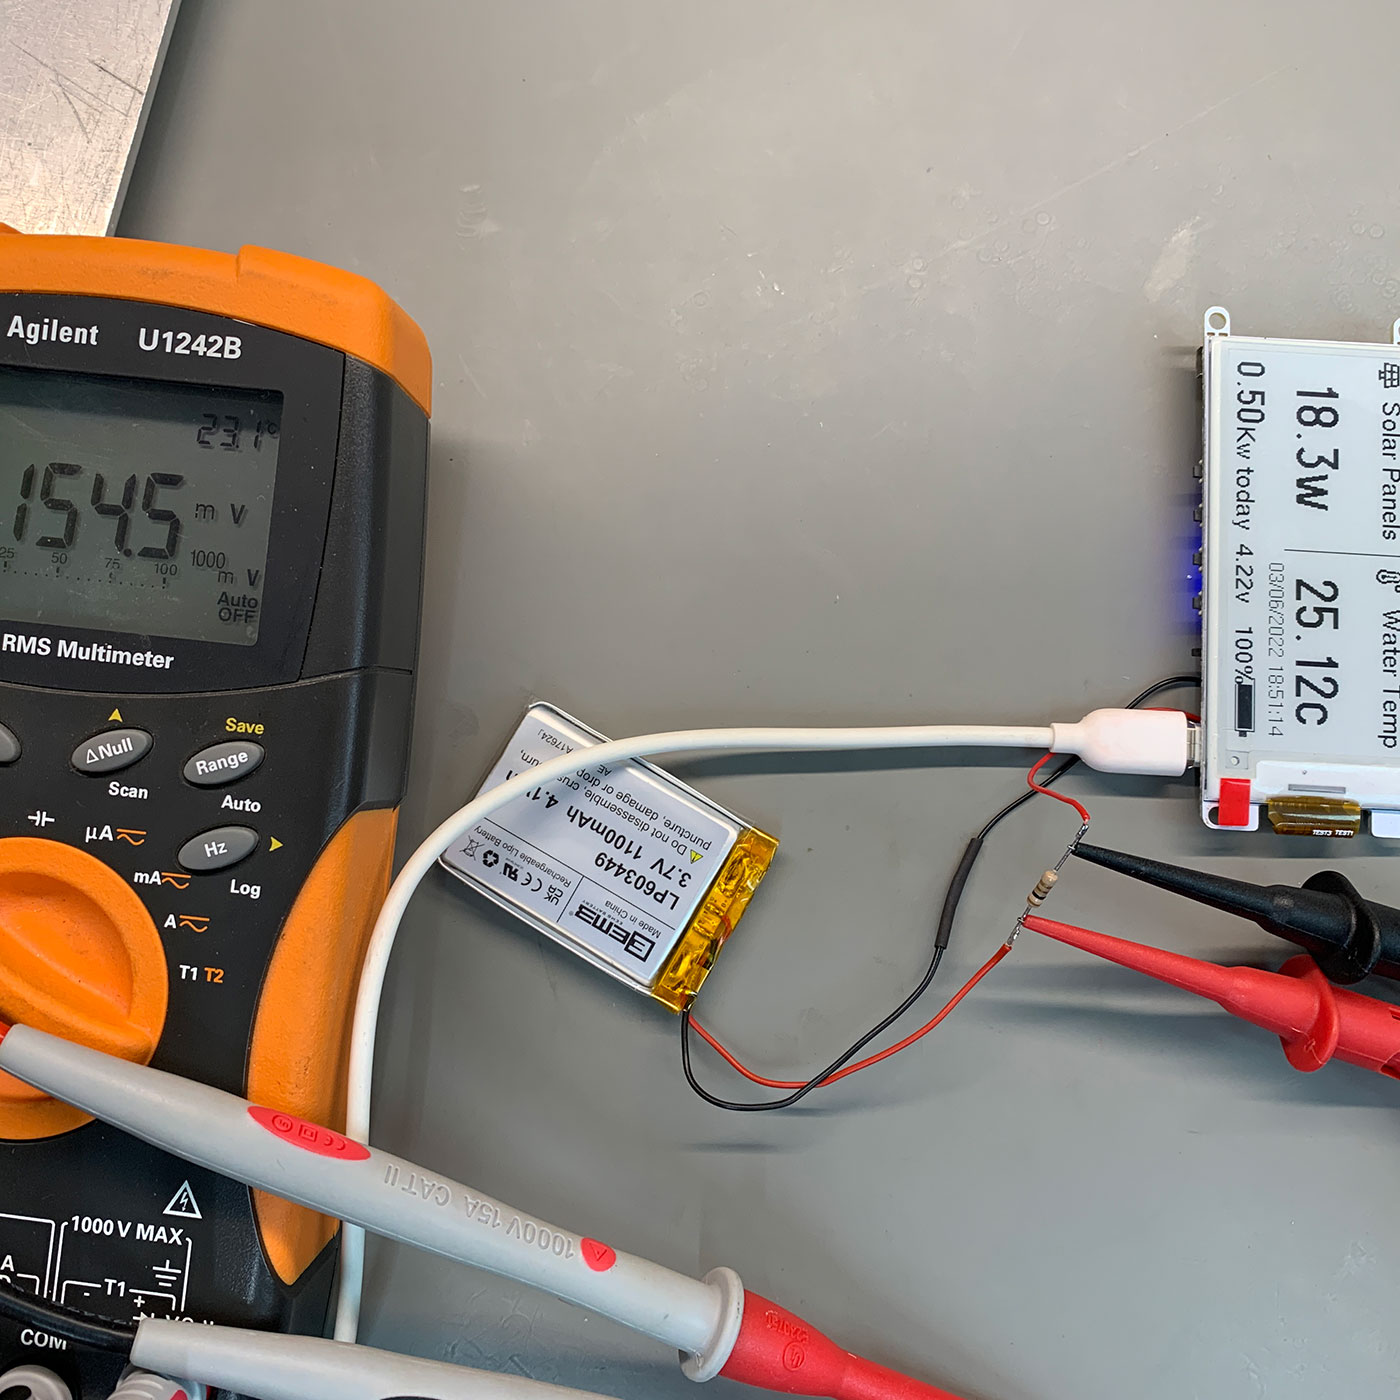 Measuring power consumption of the display